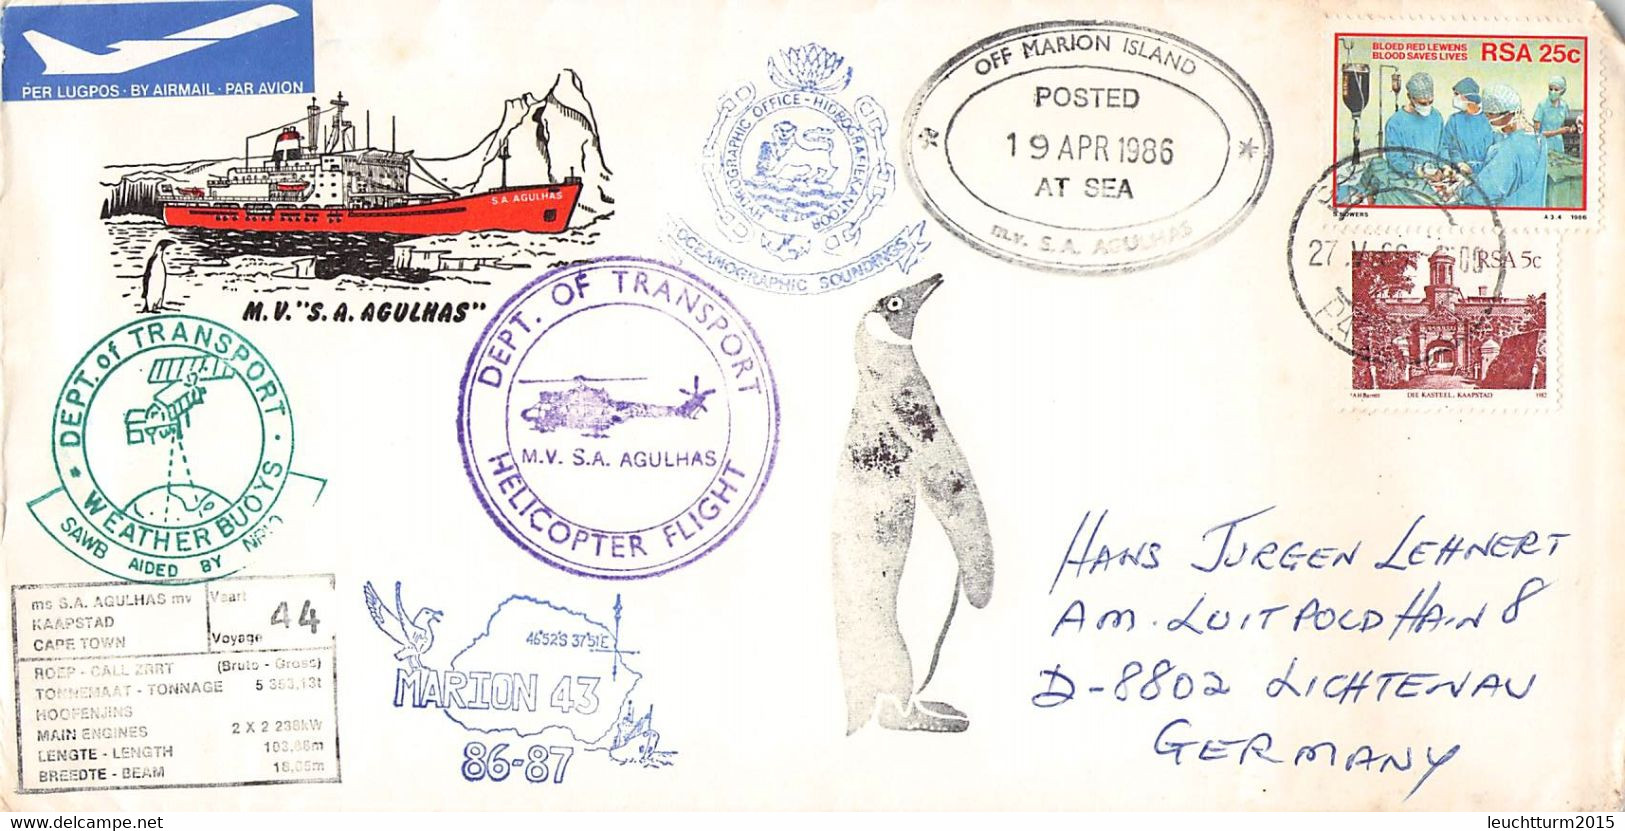 SOUTH AFRICA - POSTED AT SEA OFF MARION ISLAND 1986 / GR240 - Brieven En Documenten